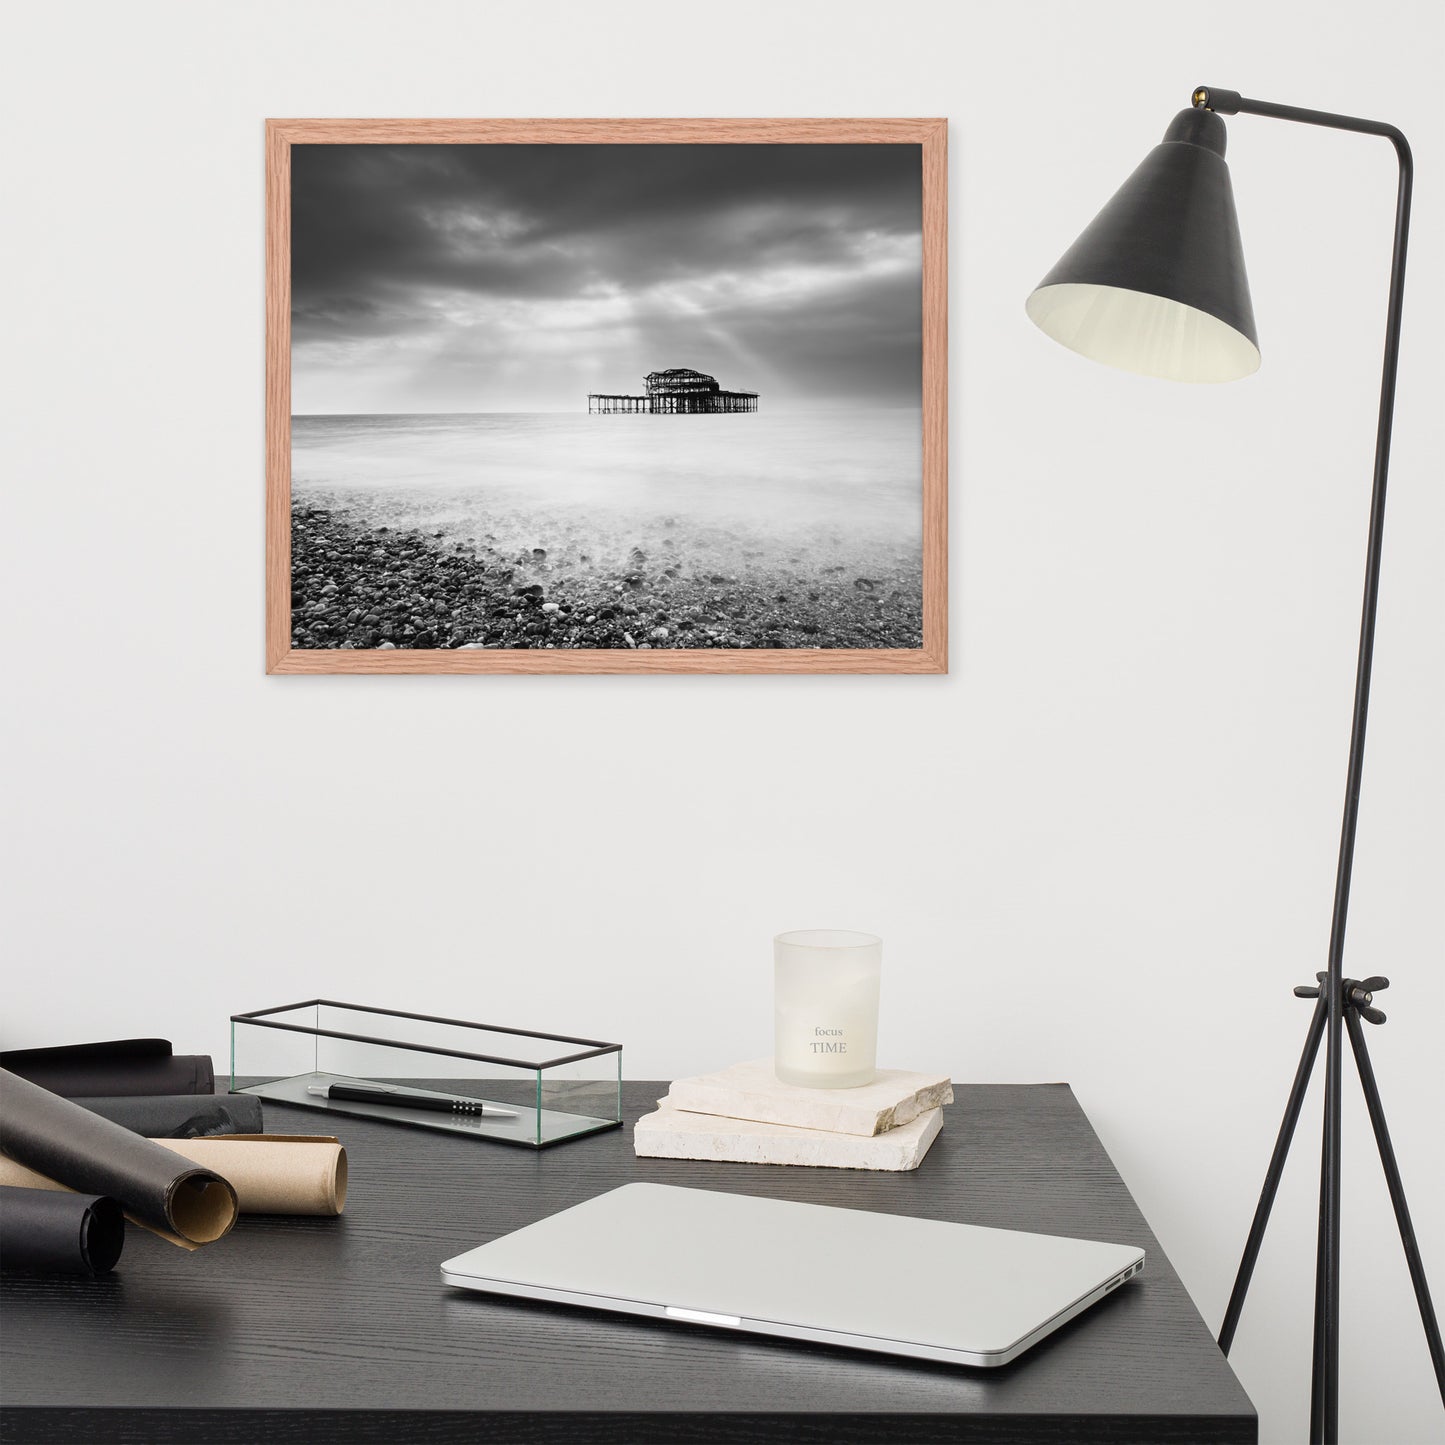 Best Home Office Wall Art: Abandoned West Pier Coastal Seascape Landscape Black and White Photograph Framed Wall Art Print